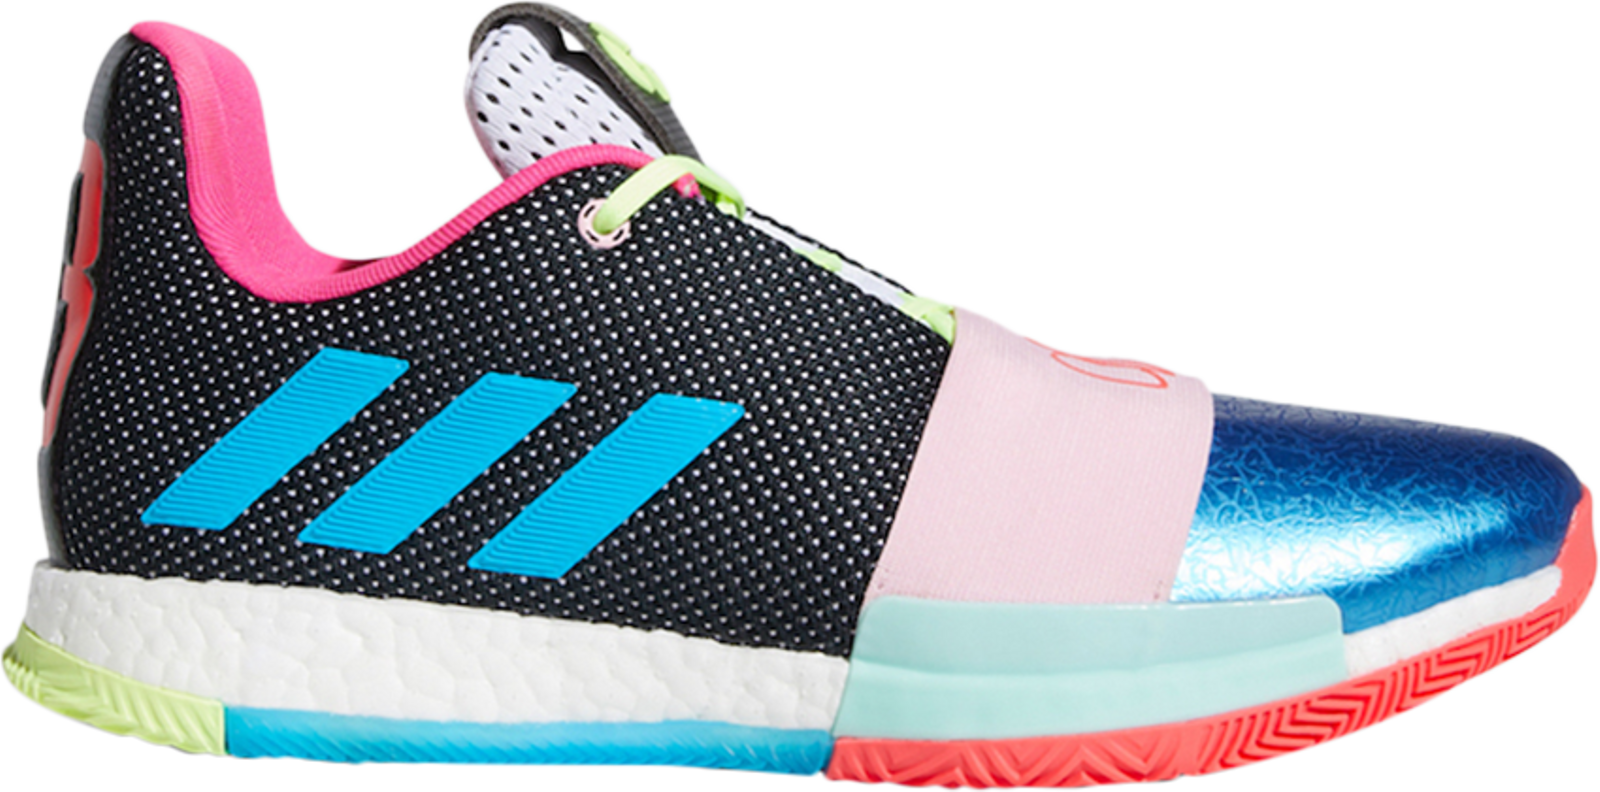 Buy Harden Vol. 3 'Different Breed' - EE9370 - Multi-Color | GOAT